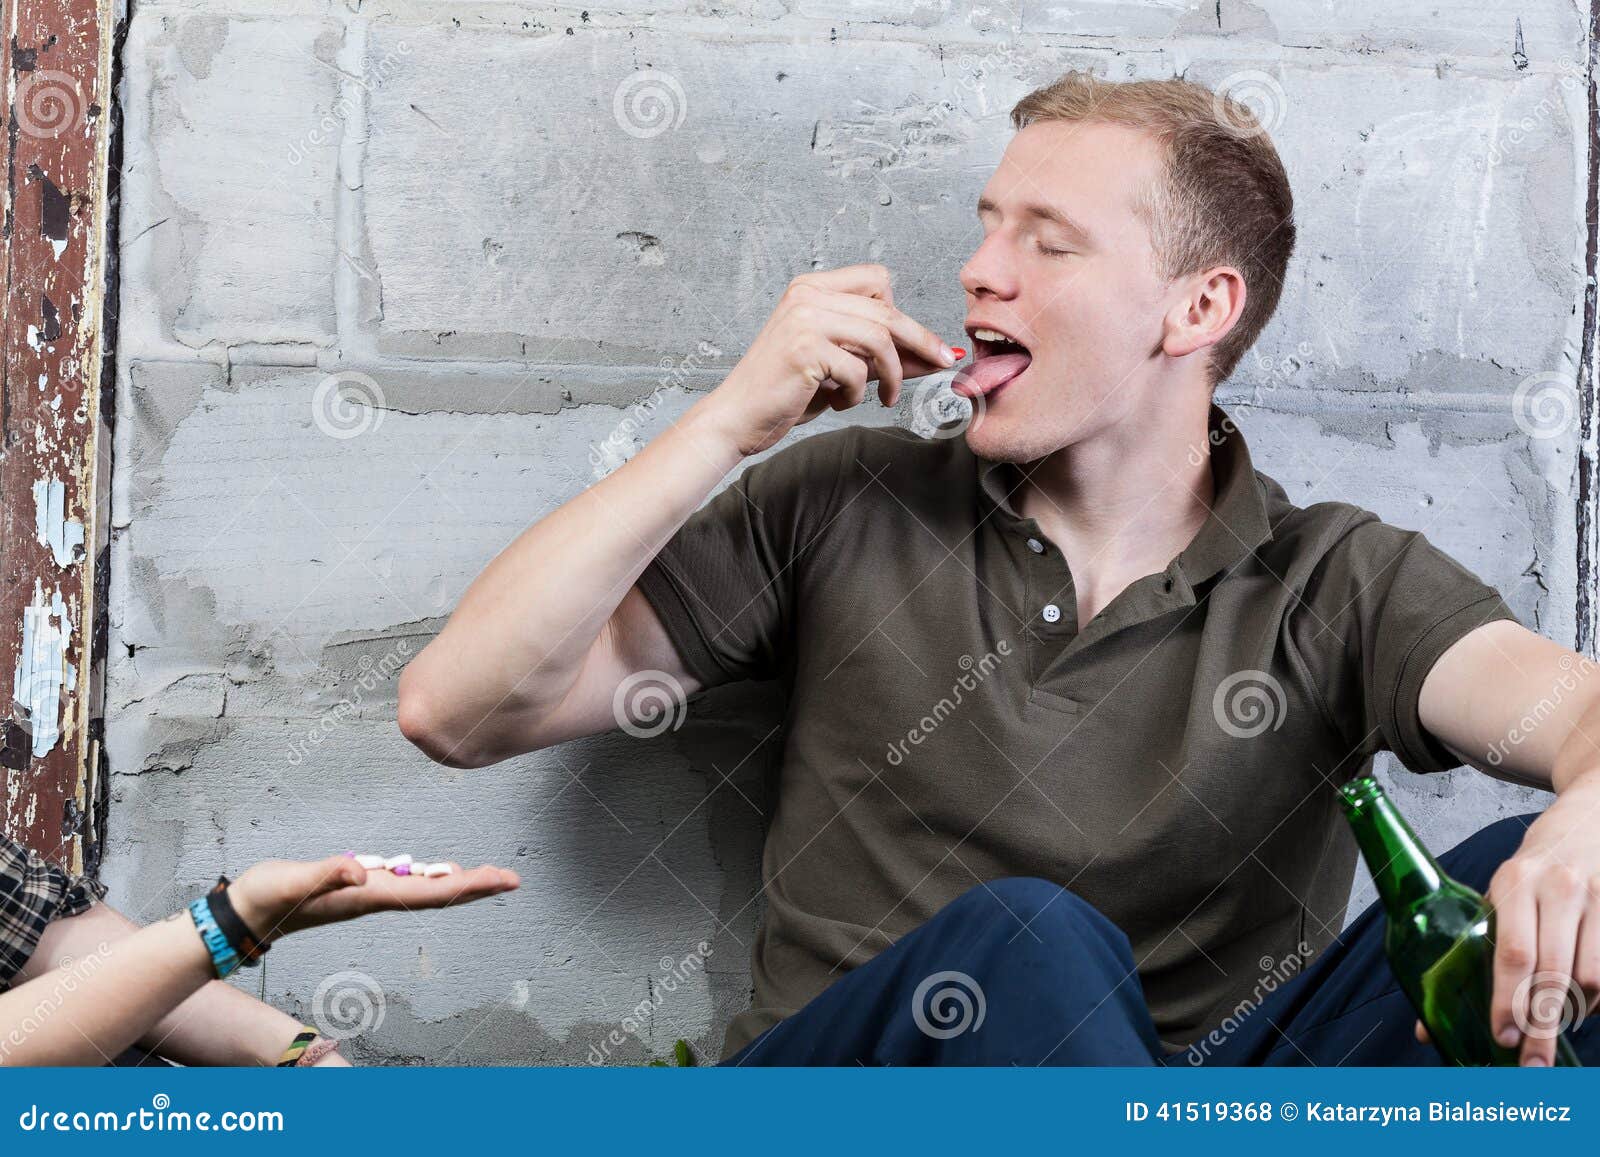 Boy taking drugs stock photo. Image of drugs, anger, anarchy - 41519368